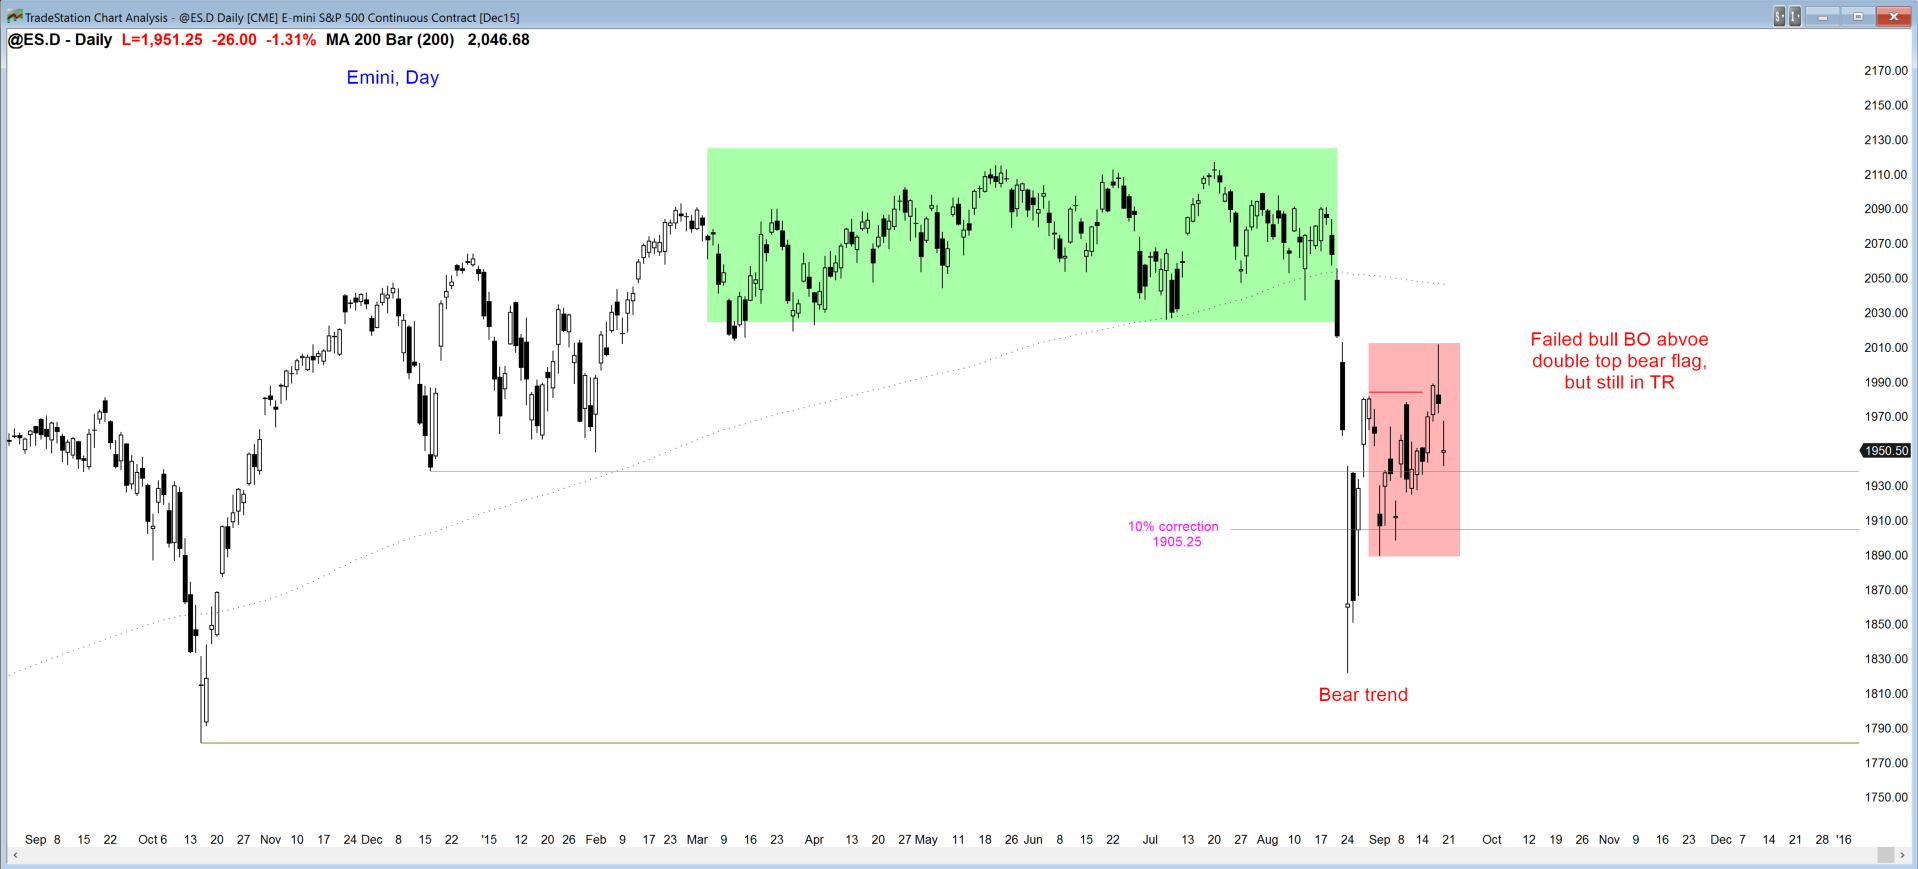 Daily S&P500 Emini Futures Candlestick Chart